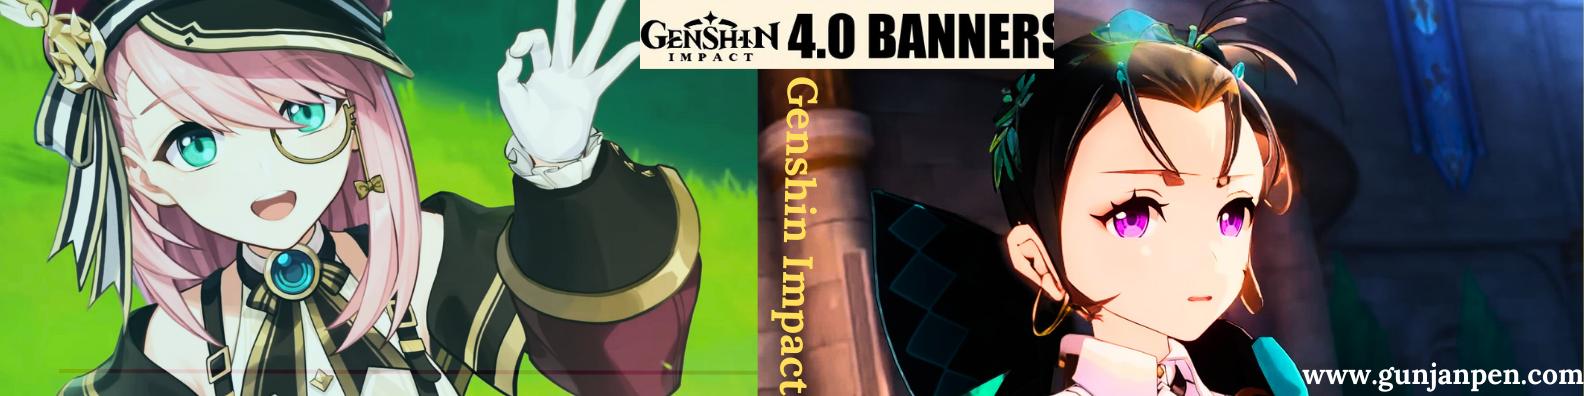 Unexpected Letdown: Genshin Impact 4.0 Phase 2 Leaked Banner Leaves Fans Disappointed